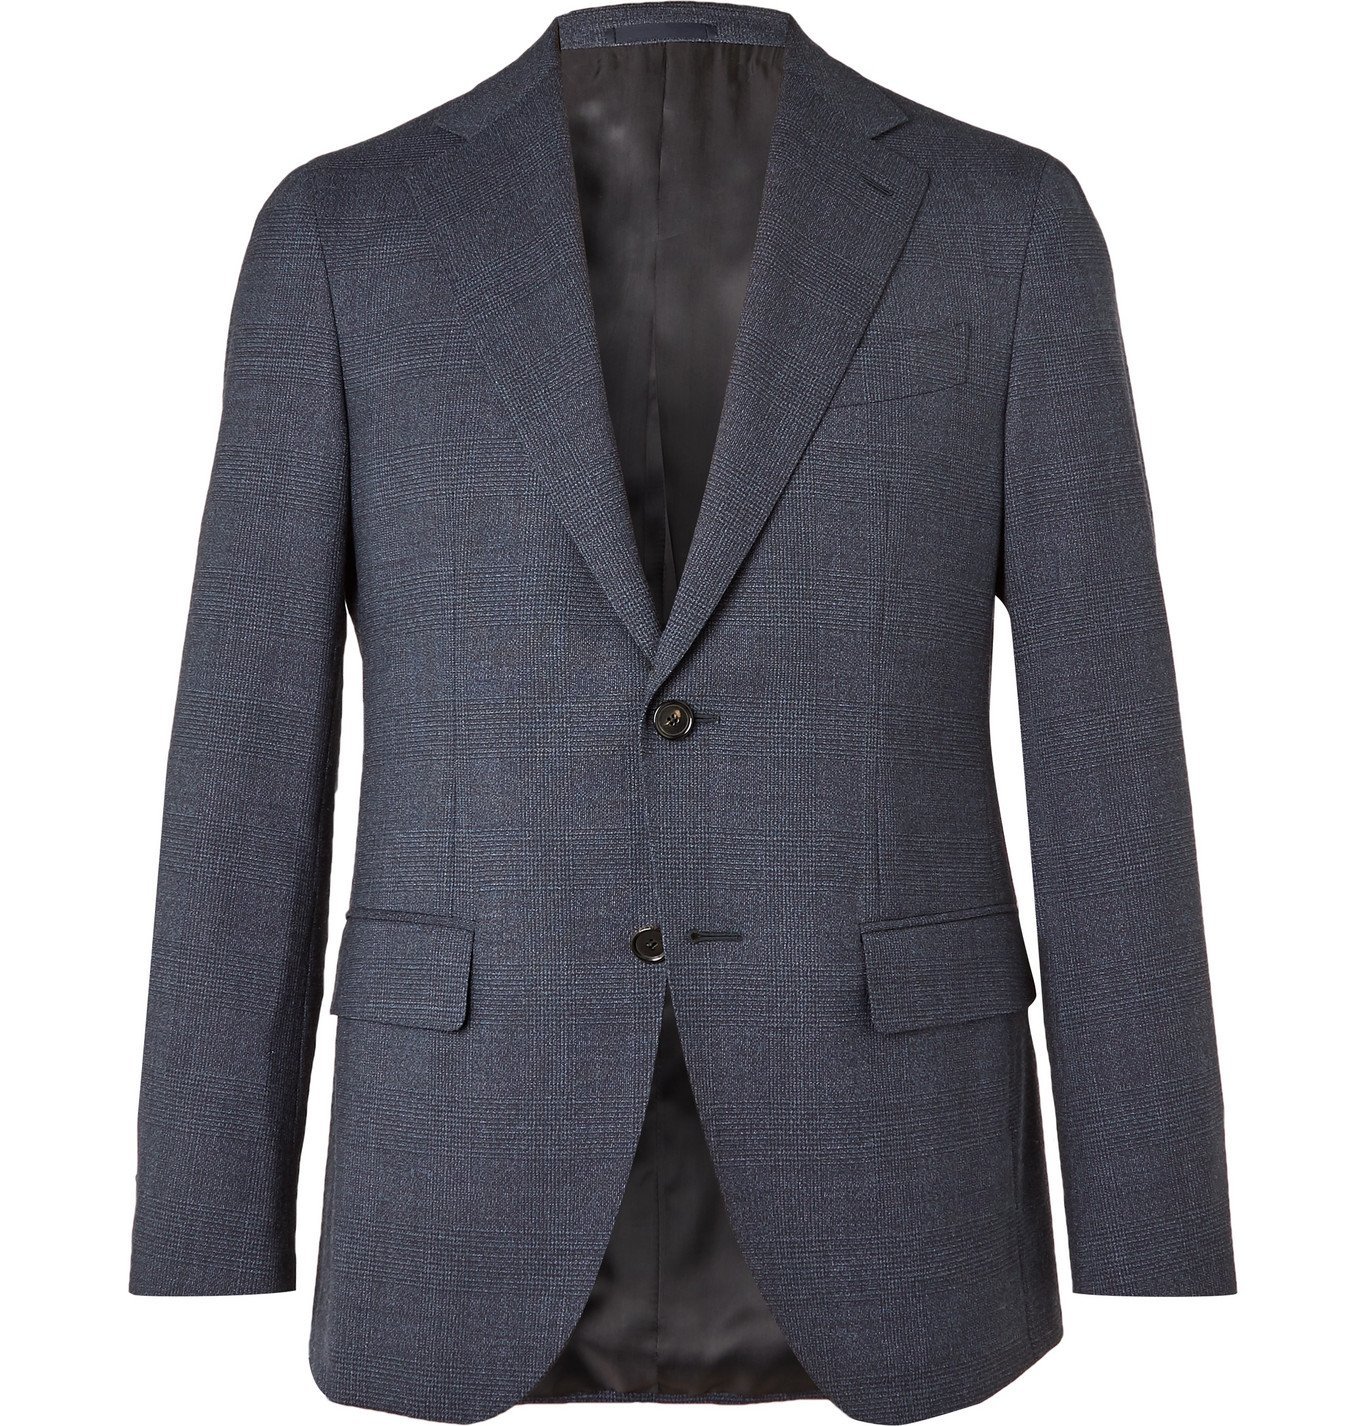 Caruso - Slim-Fit Prince of Wales Checked Wool Suit Jacket - Blue Caruso